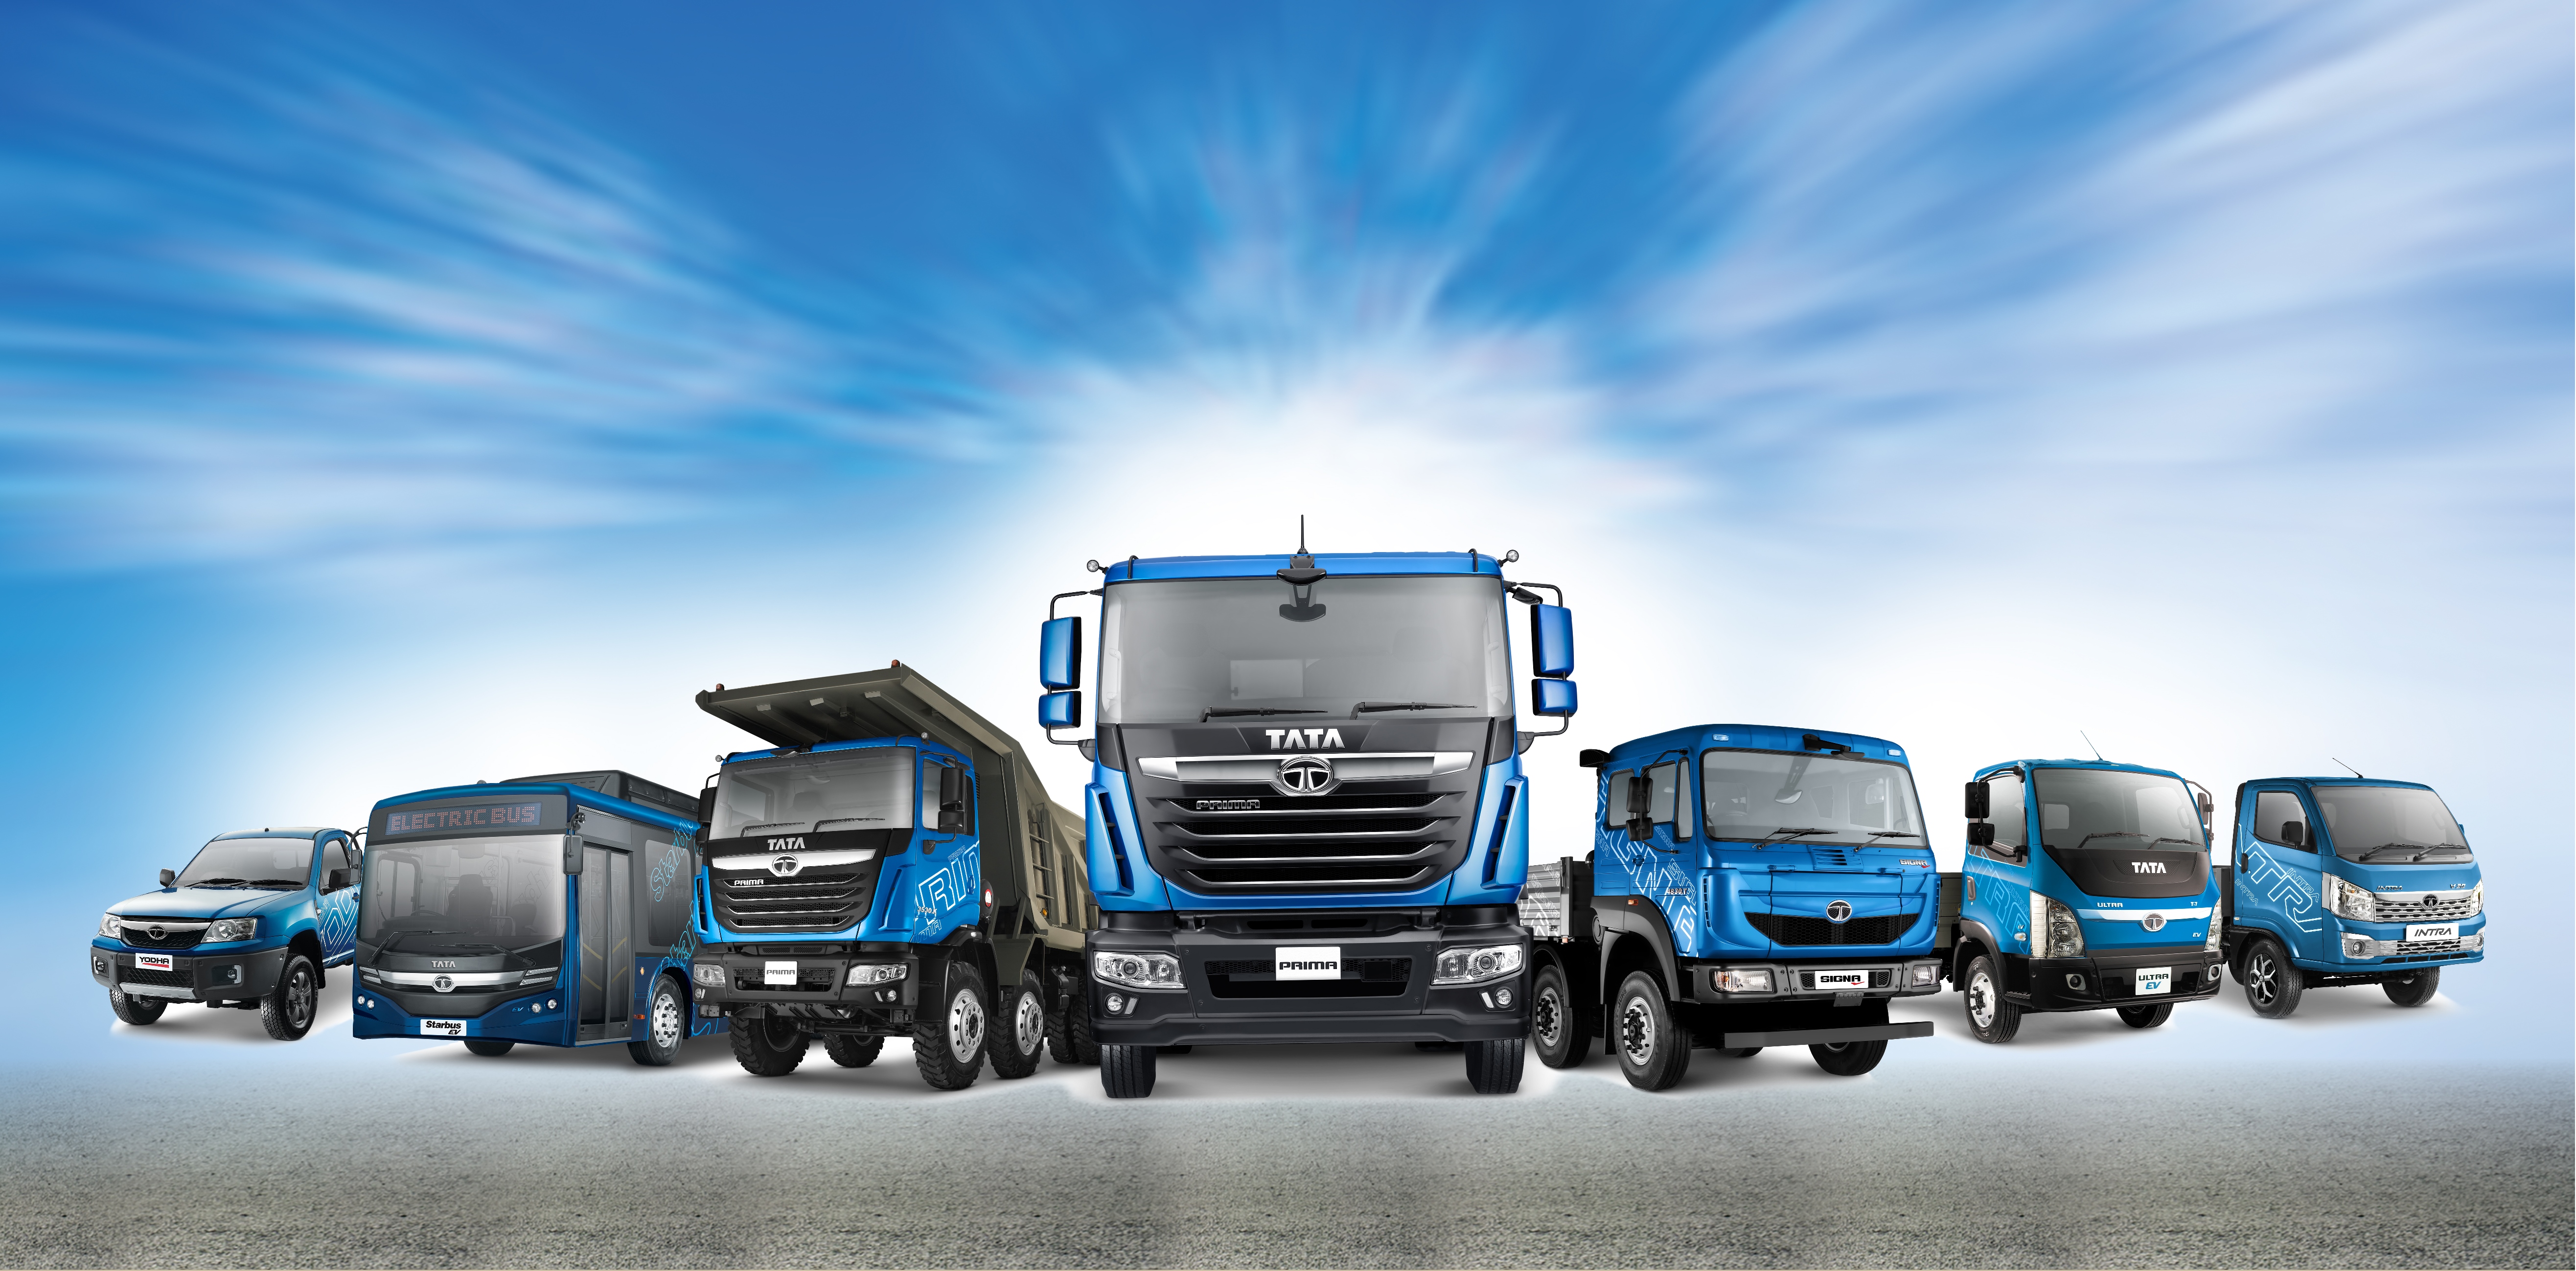 Tata Motors bags order of 1,300 commercial vehicles from VRL Logistics Limited